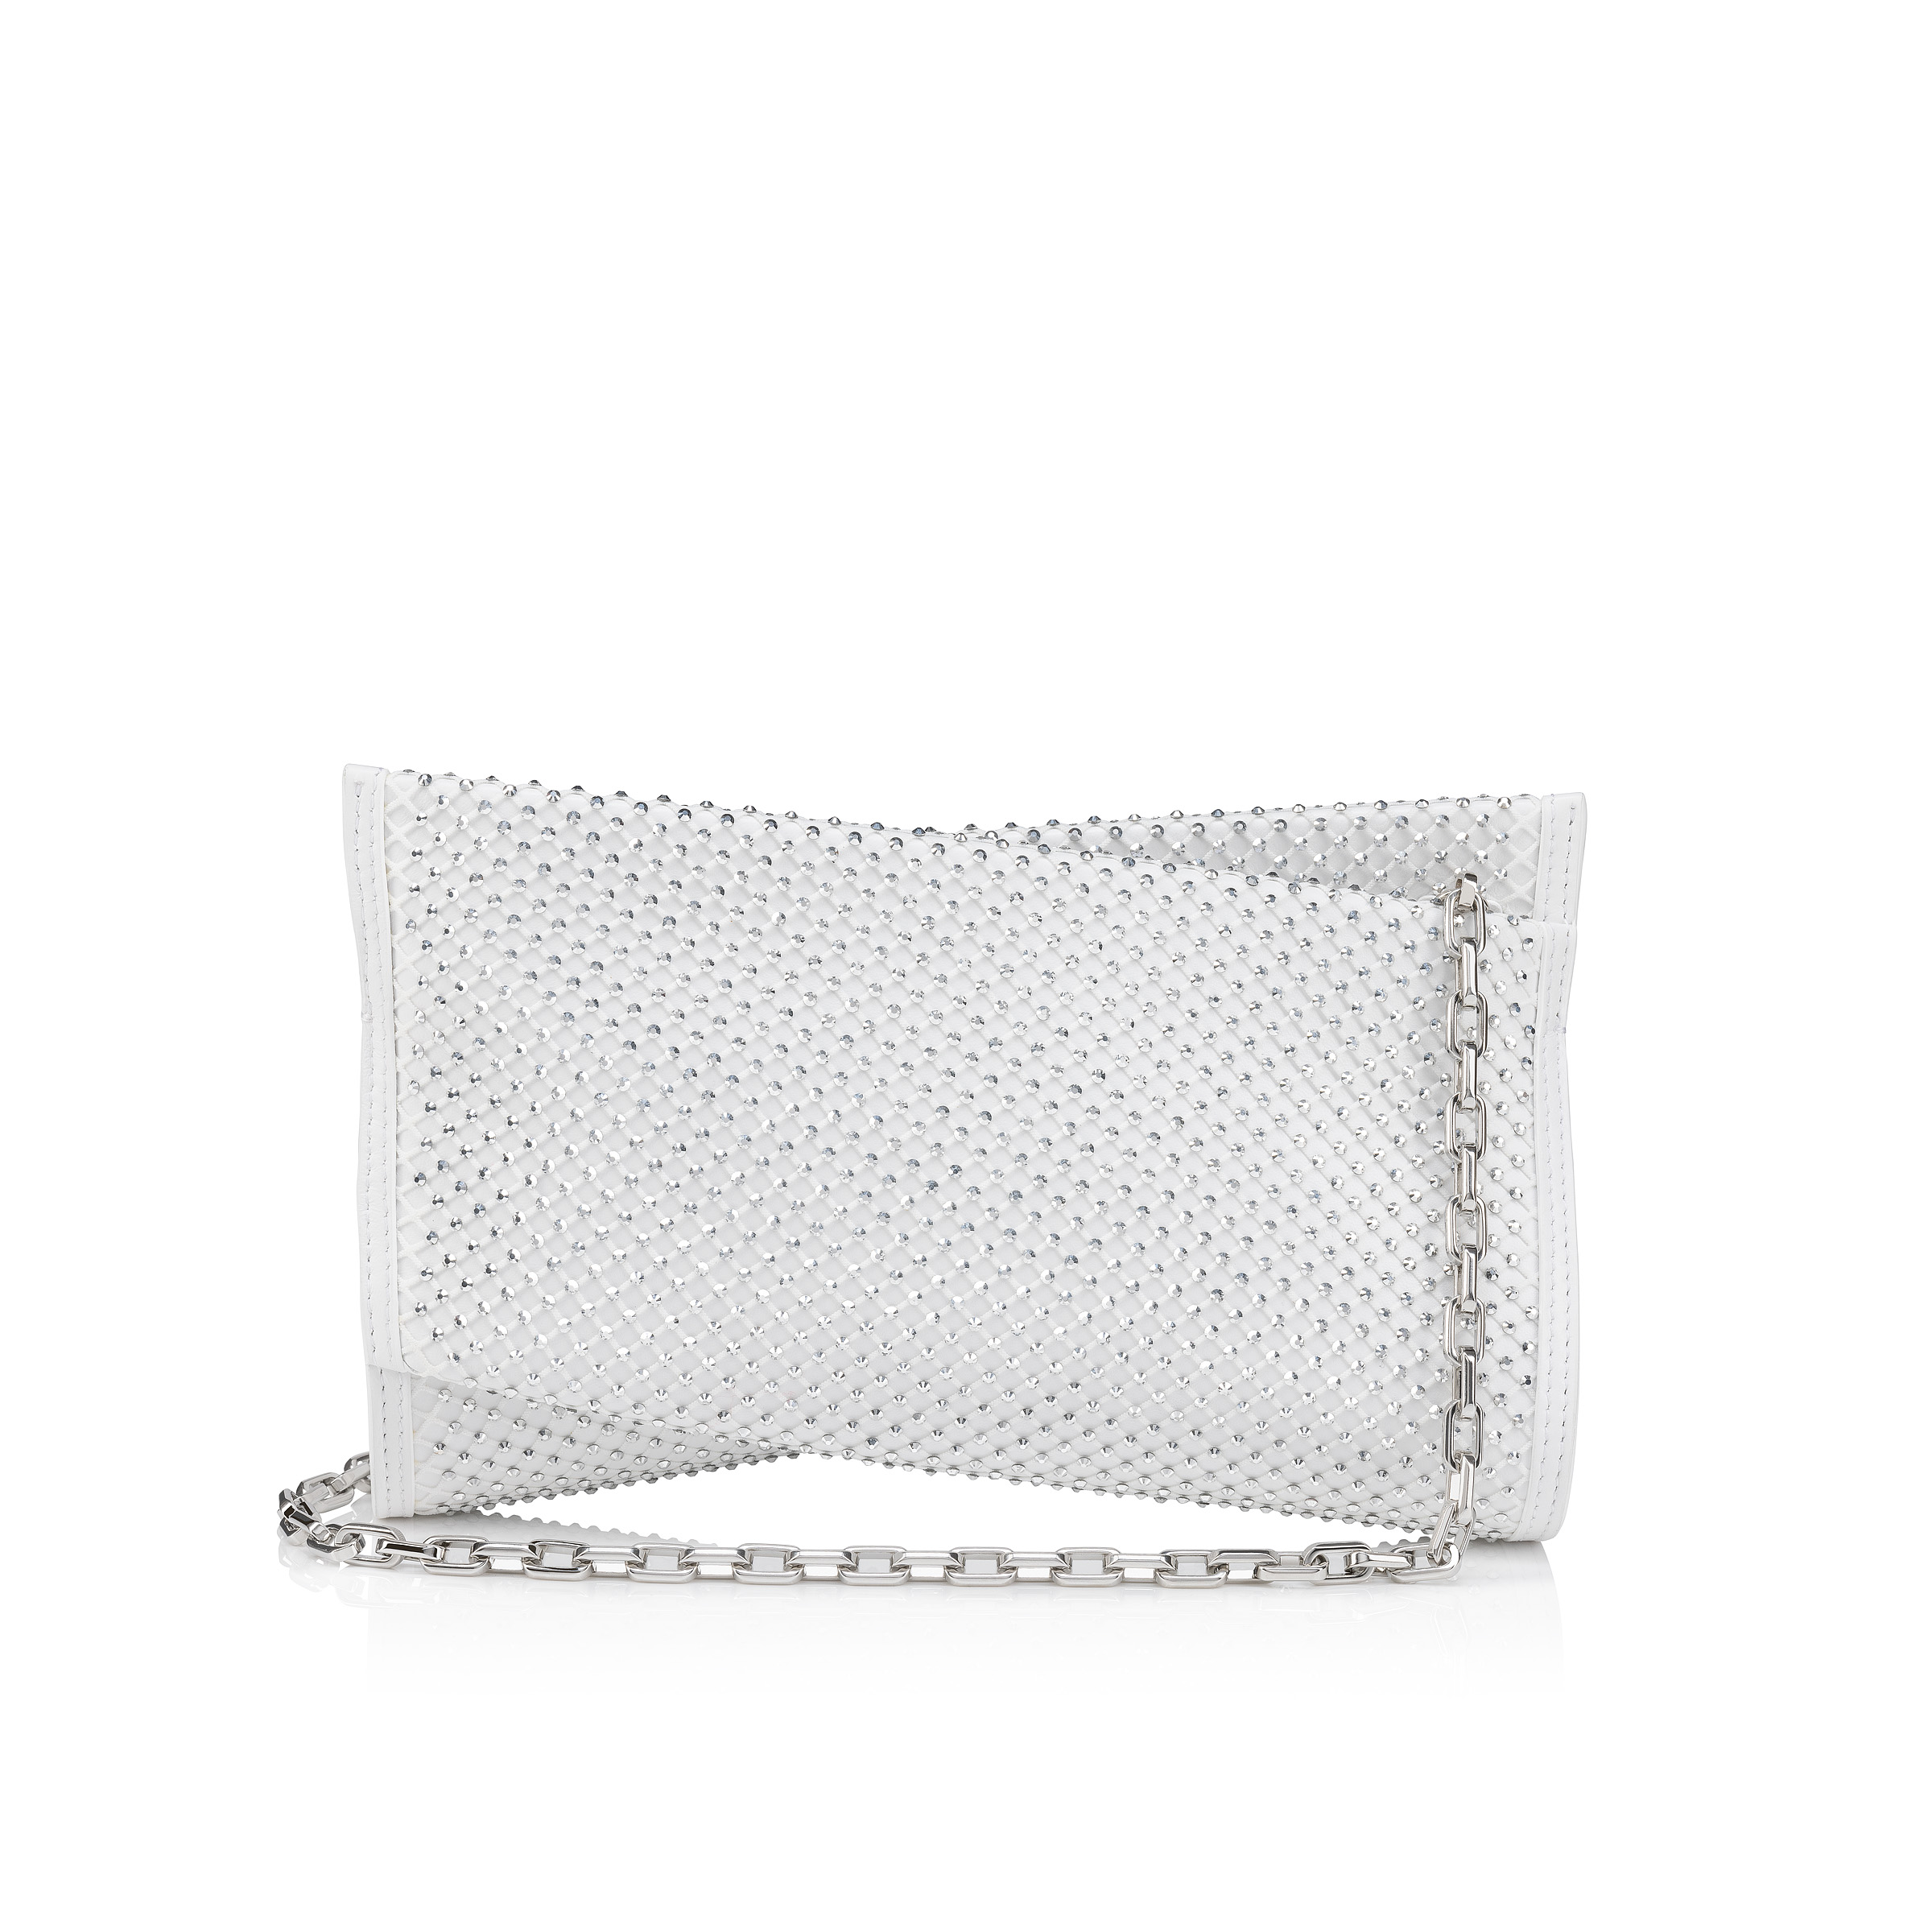 Loubitwist small - Clutch - Nappa leather, mesh and strass - White 